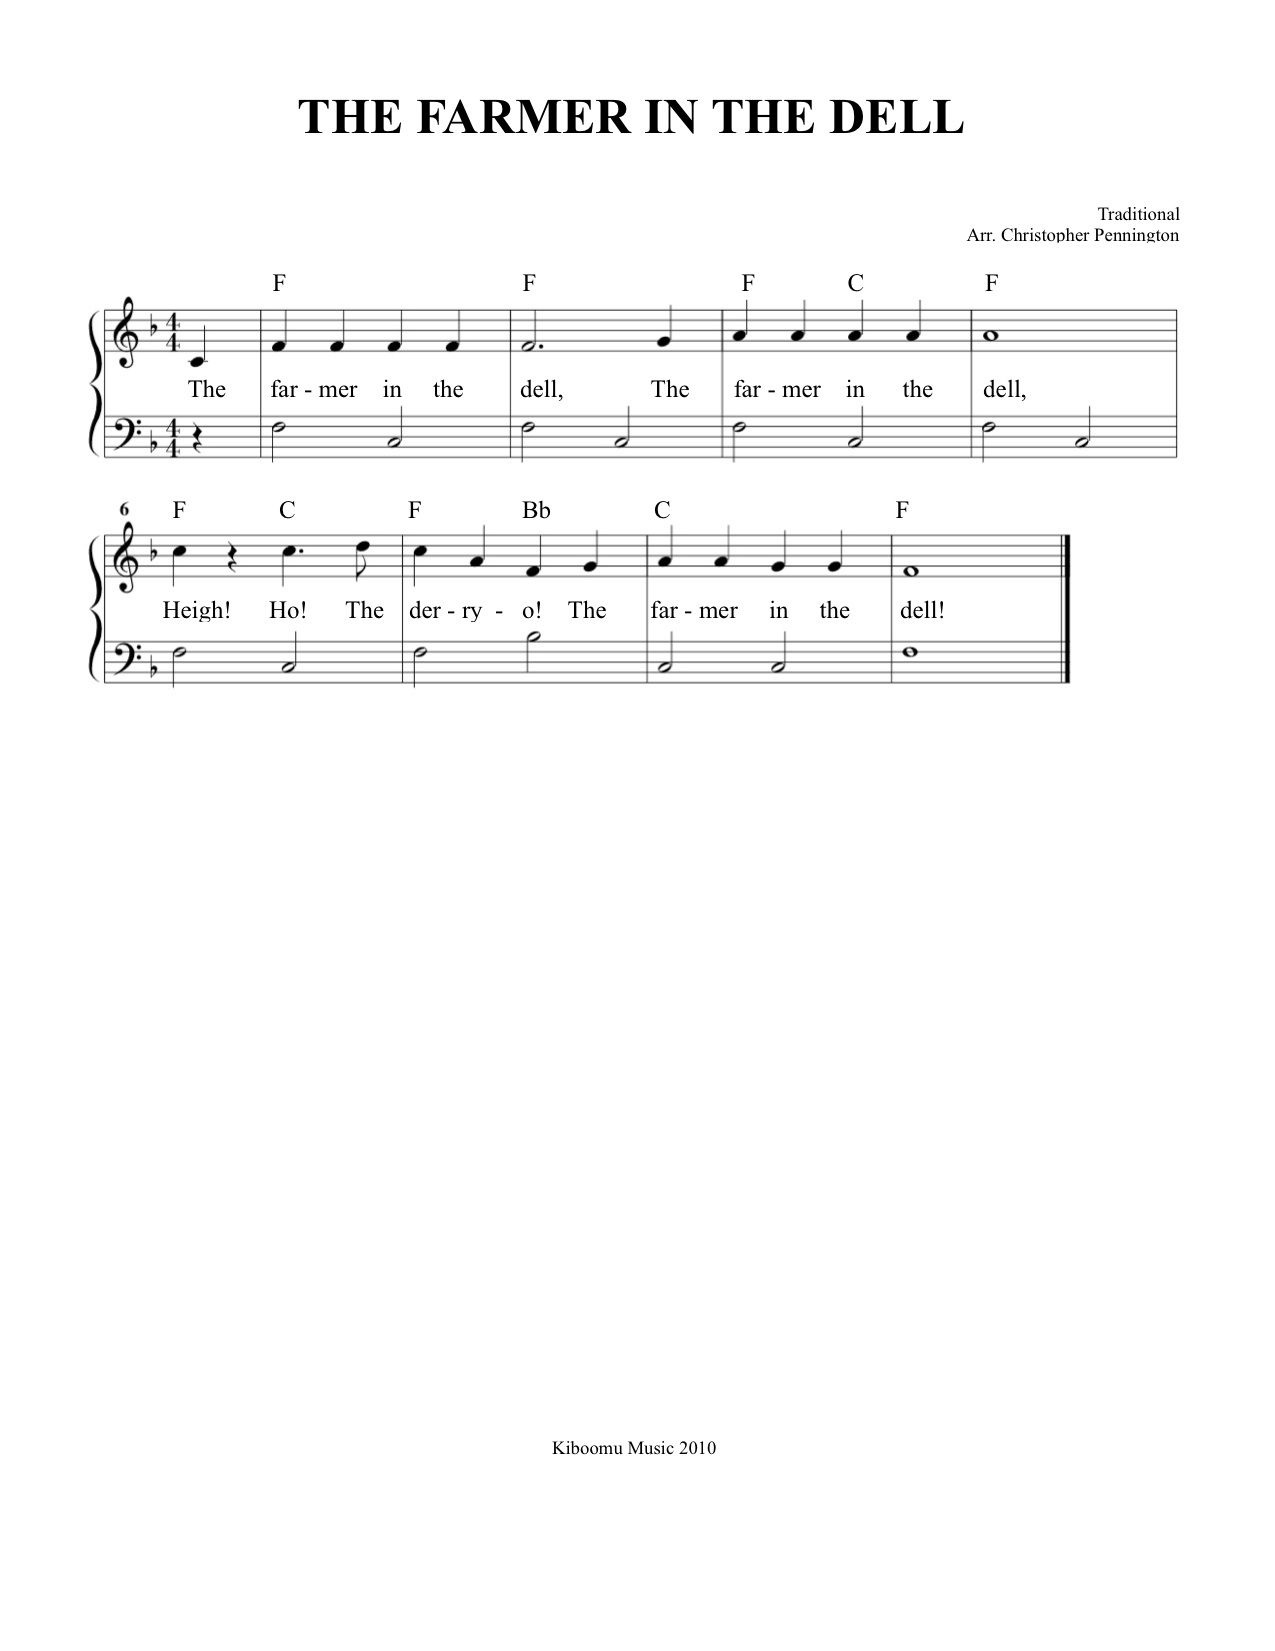 The Farmer In The Dell Sheet Music | Music To Sleep To | Music - Free Printable Sheet Music Lyrics